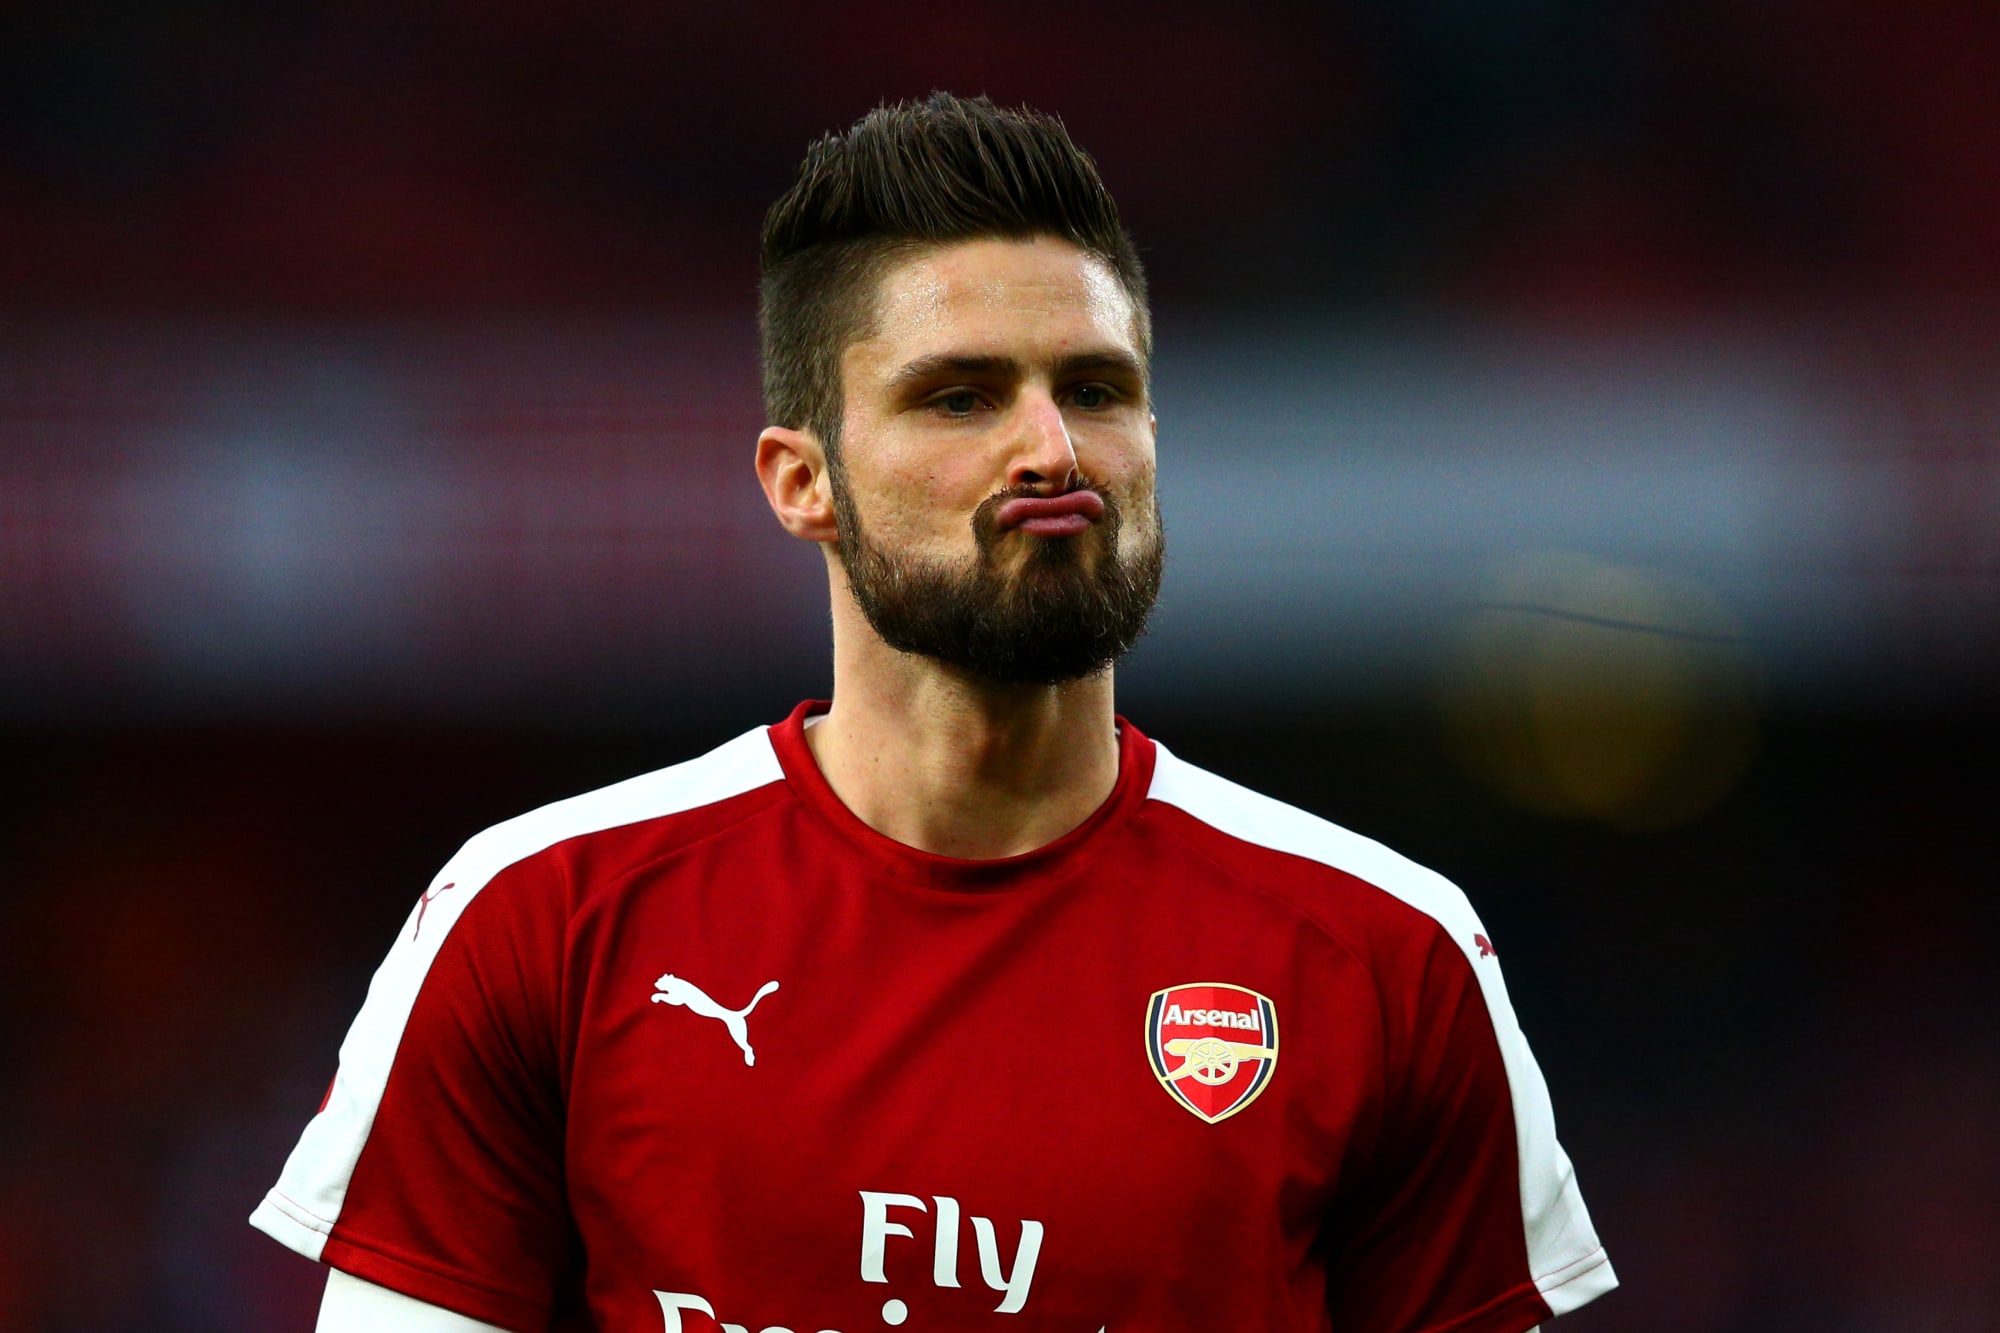 Arsenal: Olivier Giroud Has Become More Important Than RVP